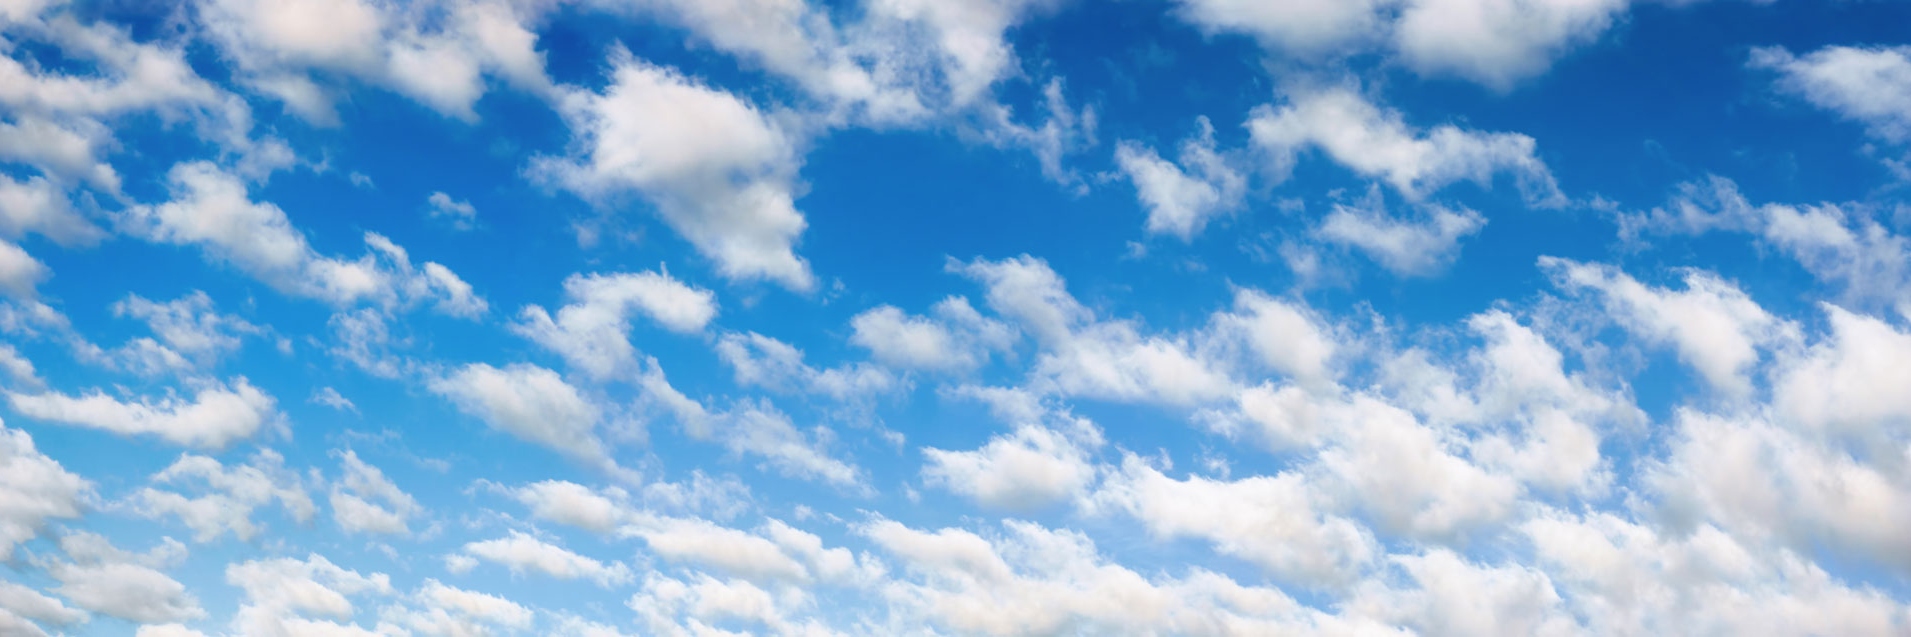 Fluffy white clouds on blue sky panorama